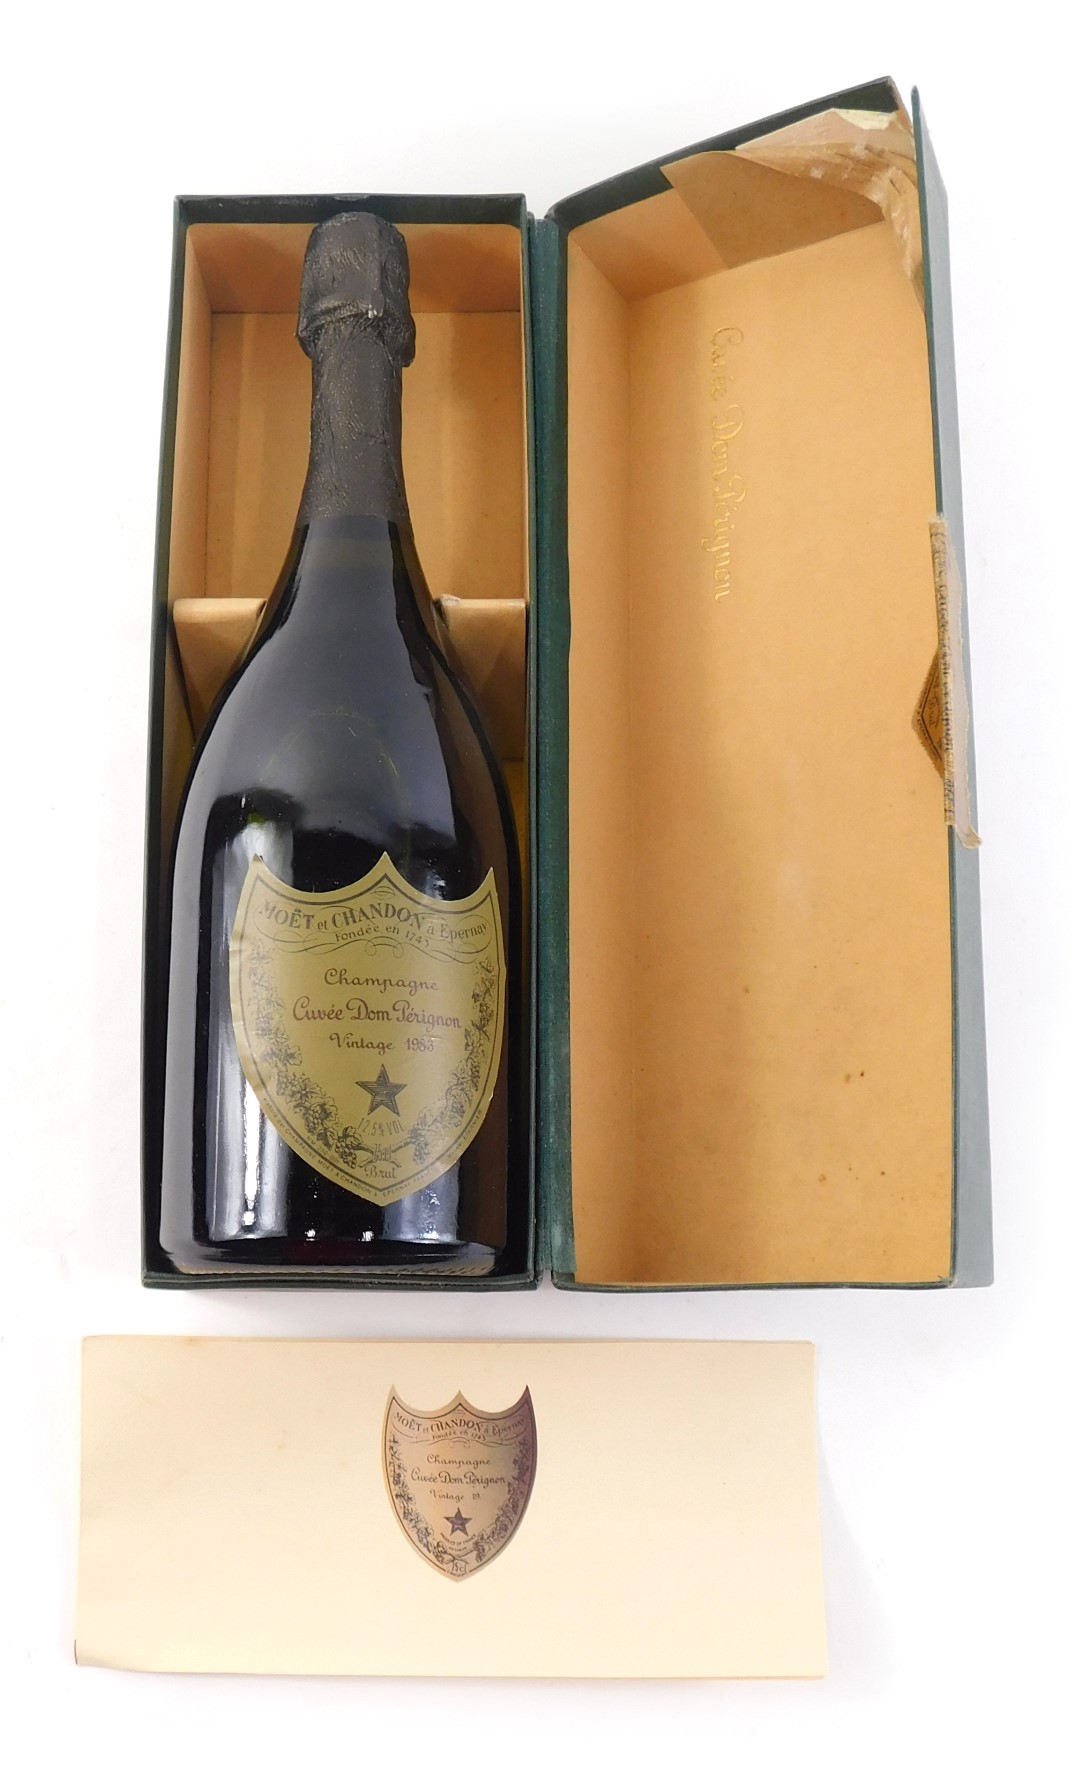 A bottle of Moet and Chandon Dom Perignon Vintage 1983 Champagne, in presentation box with paperwork